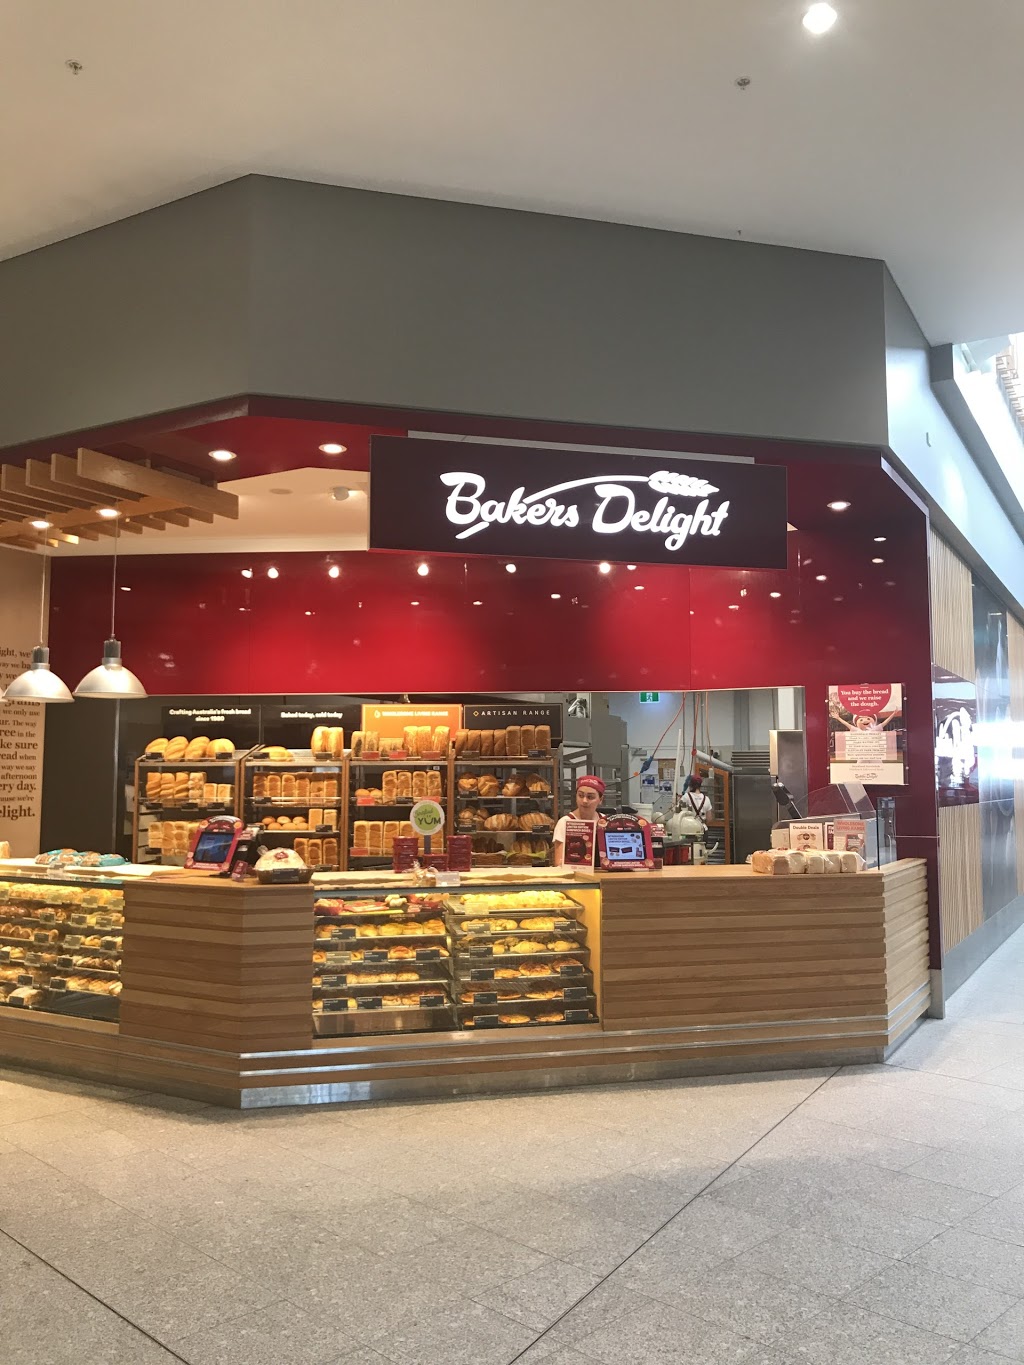 Bakers Delight Harrisdale | bakery | Shop 005, Stockland Harrisdale, Nicholson and Yellowwood Road, Harrisdale WA 6112, Australia | 0865941799 OR +61 8 6594 1799